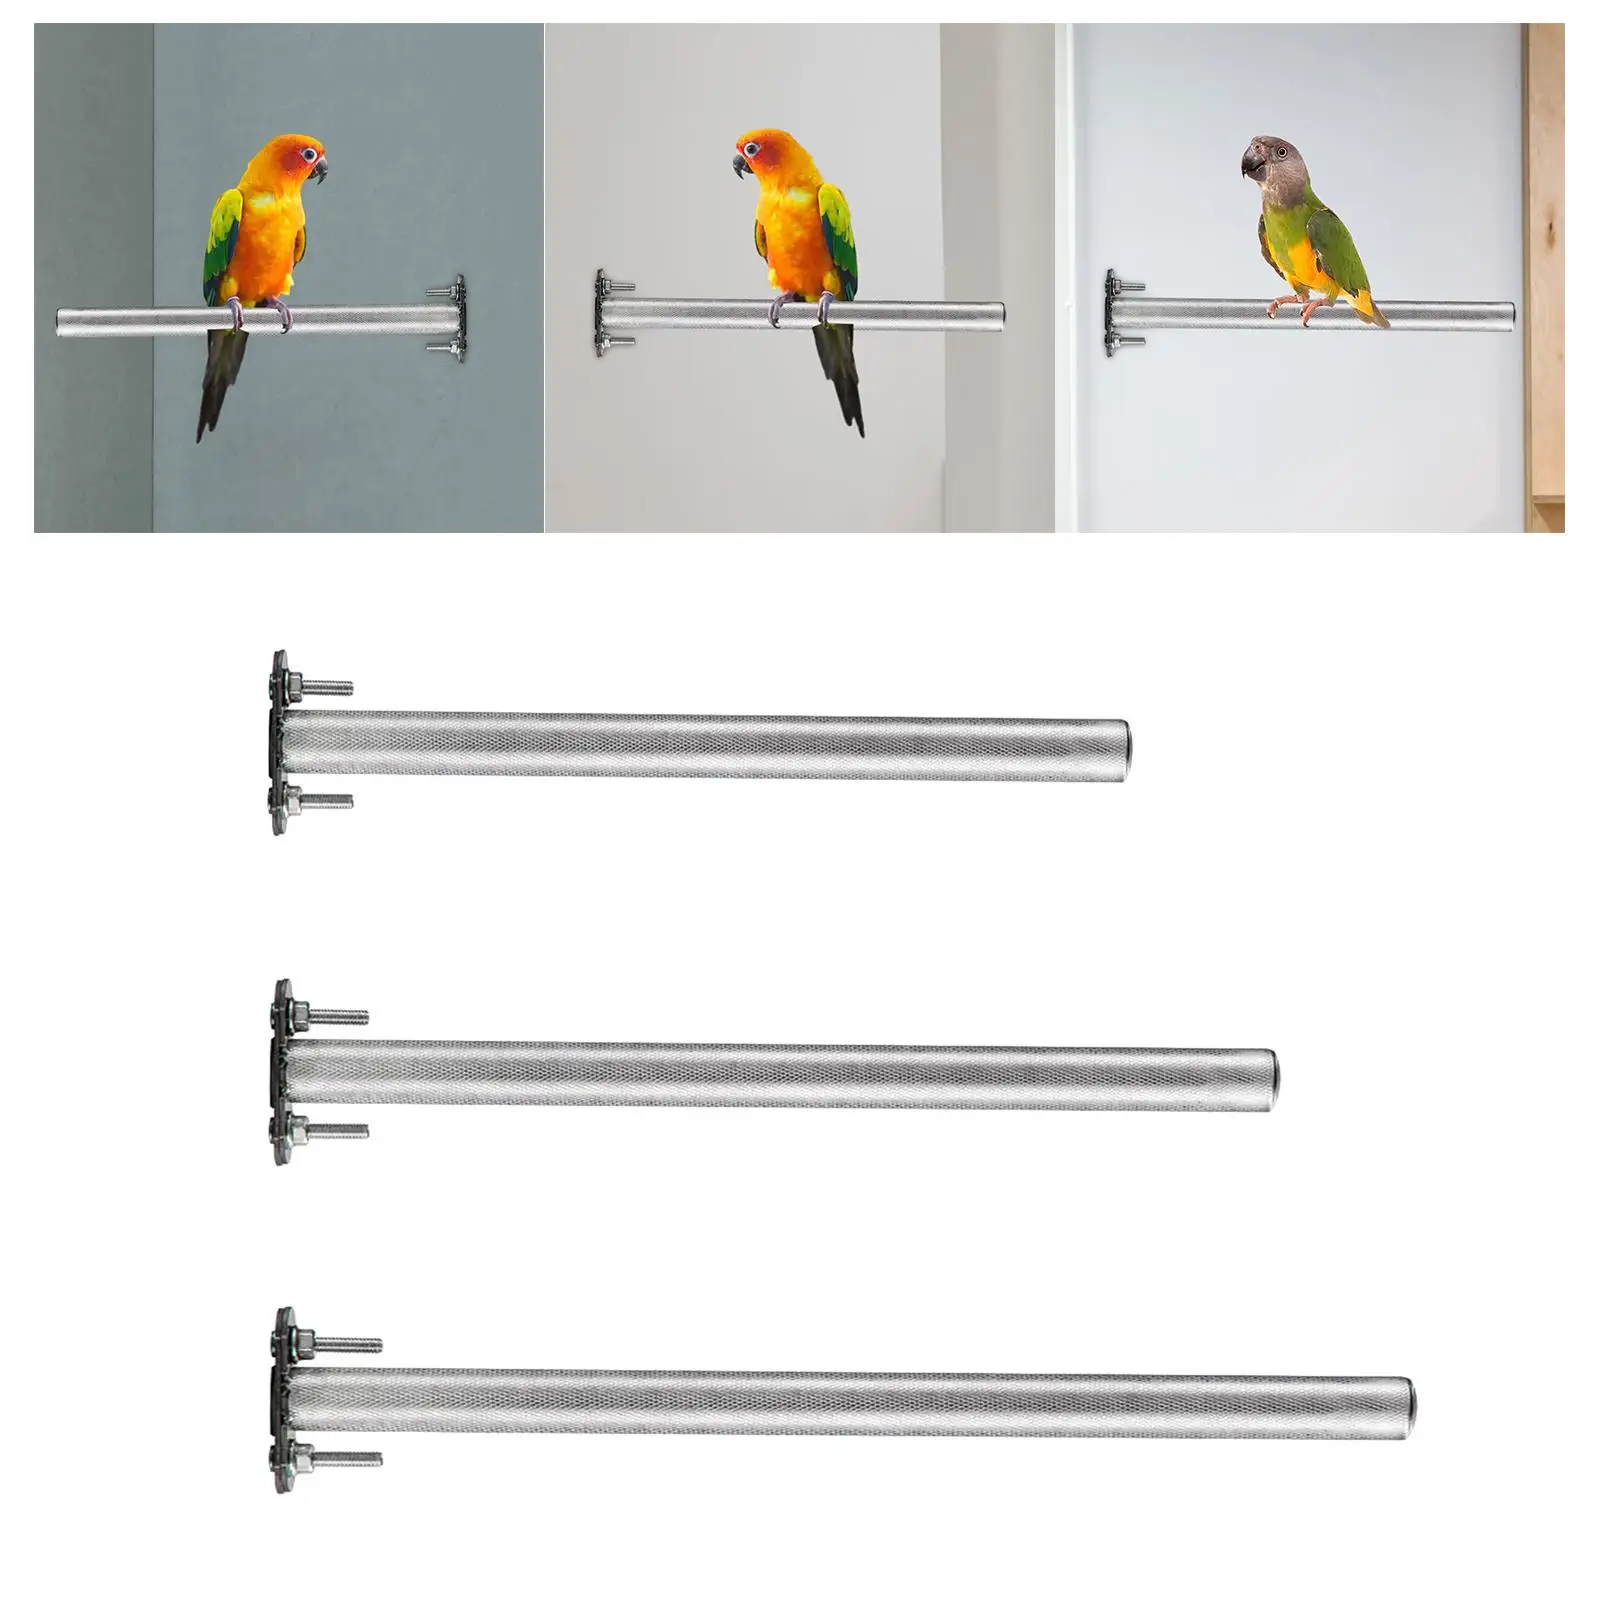 Bird Perch Stainless Steel Parrot Stand Bird Cage Perch for Budgies Parakeets Lovebirds Canaries